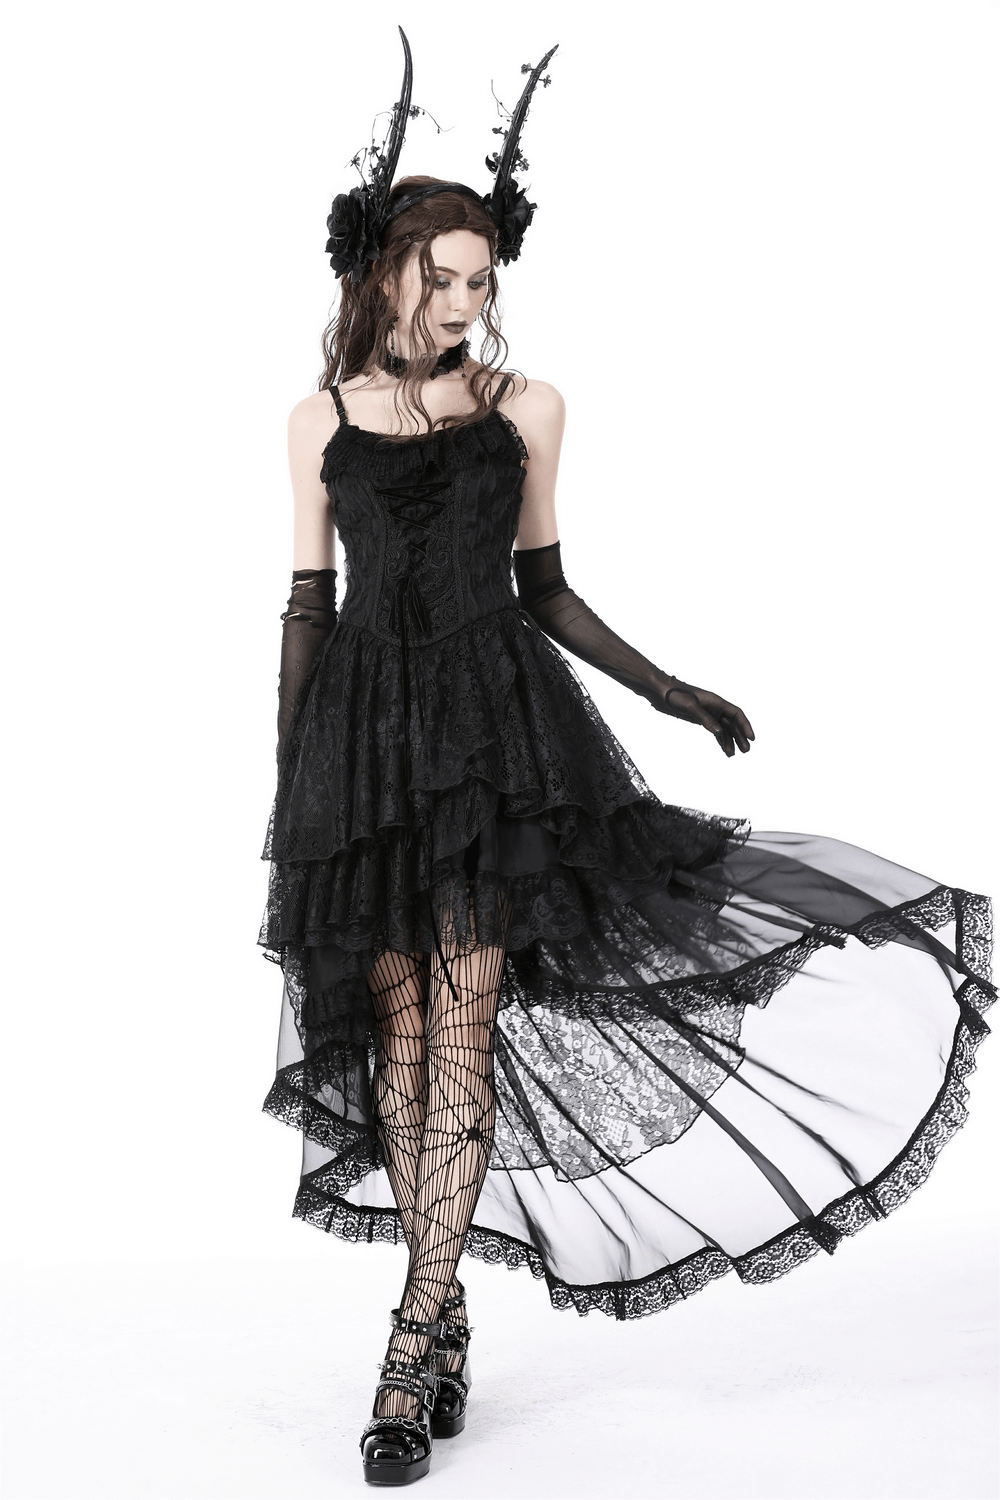 Dark Gothic Lace Trimmed High-Low Chiffon Skirt